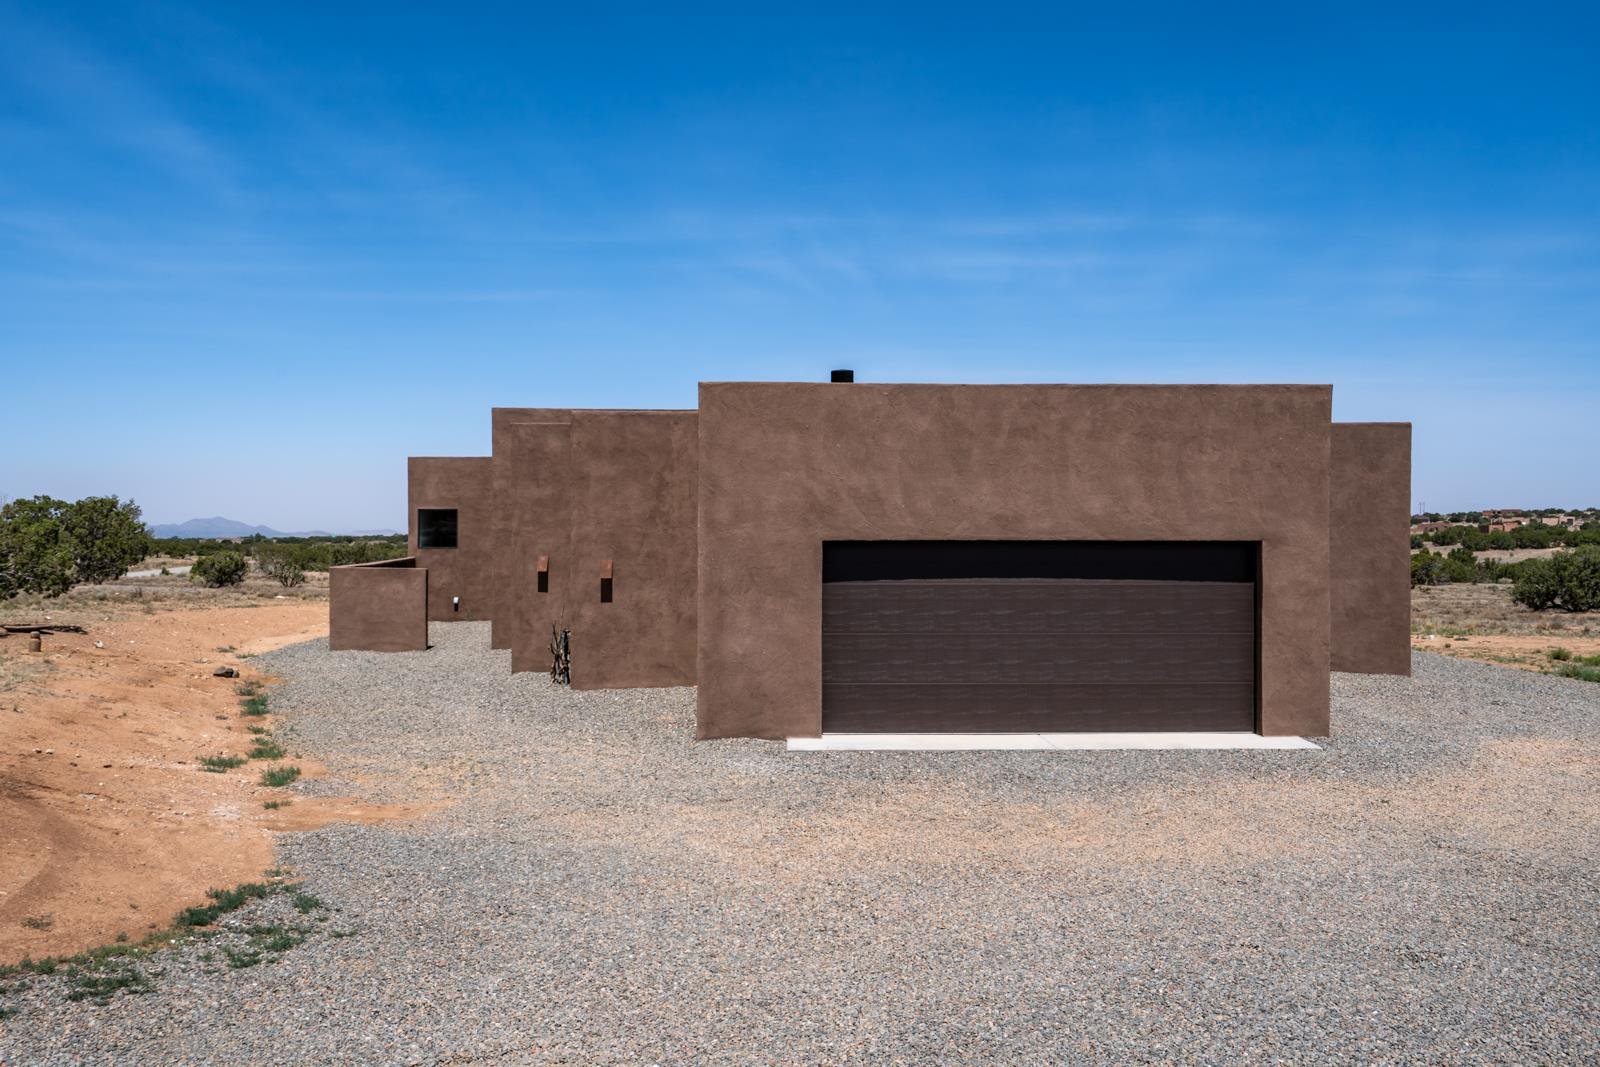 41 SPUR, Lamy, New Mexico 87540, 3 Bedrooms Bedrooms, ,2 BathroomsBathrooms,Residential,For Sale,41 SPUR,202102588